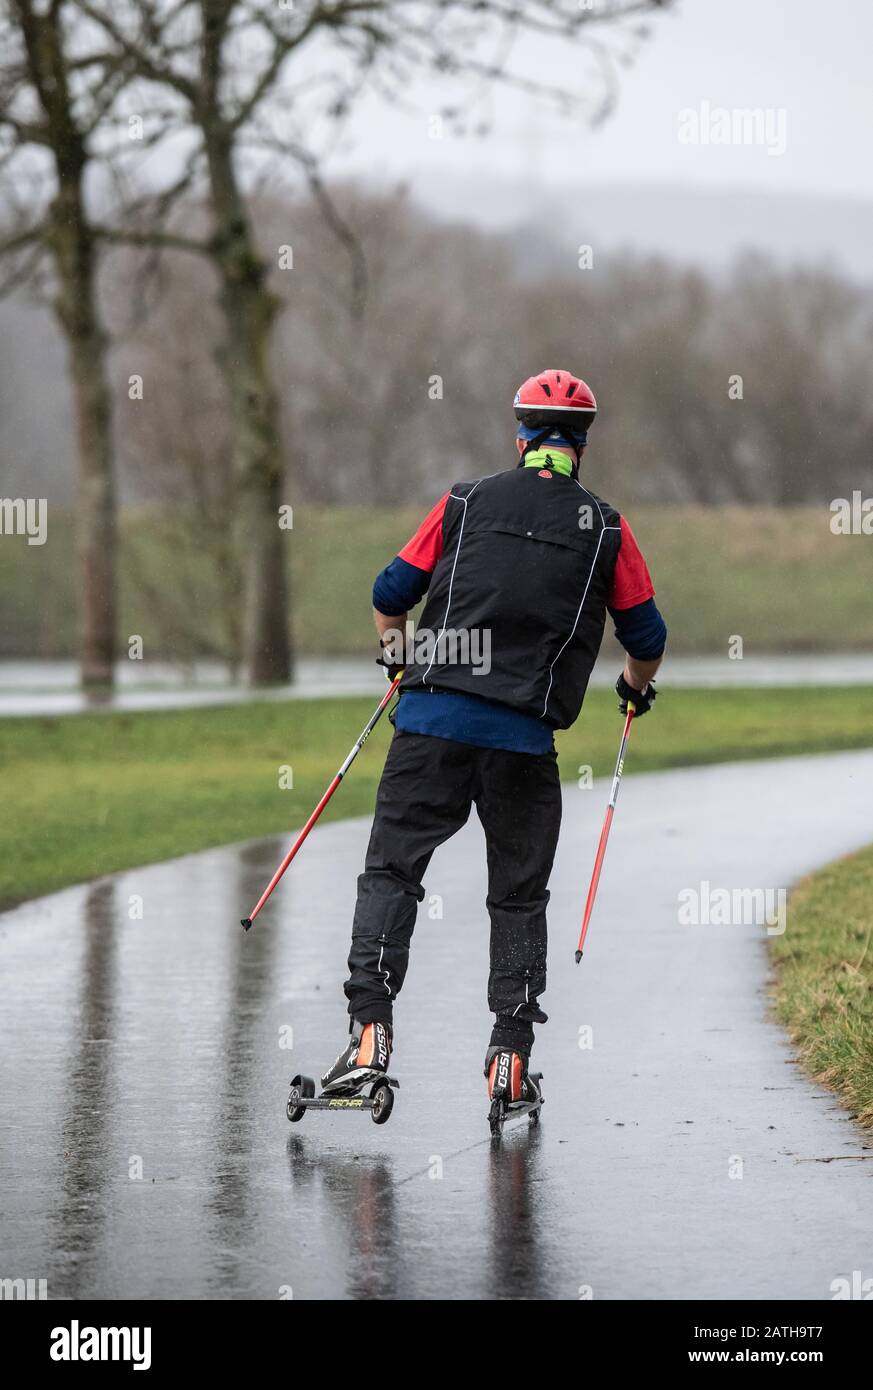 Bochum, Germany. 03rd Feb, 2020. A man with roller skis is on a rain-soaked  road at the Kemnader lake. Credit: Bernd Thissen/dpa/Alamy Live News Stock  Photo - Alamy